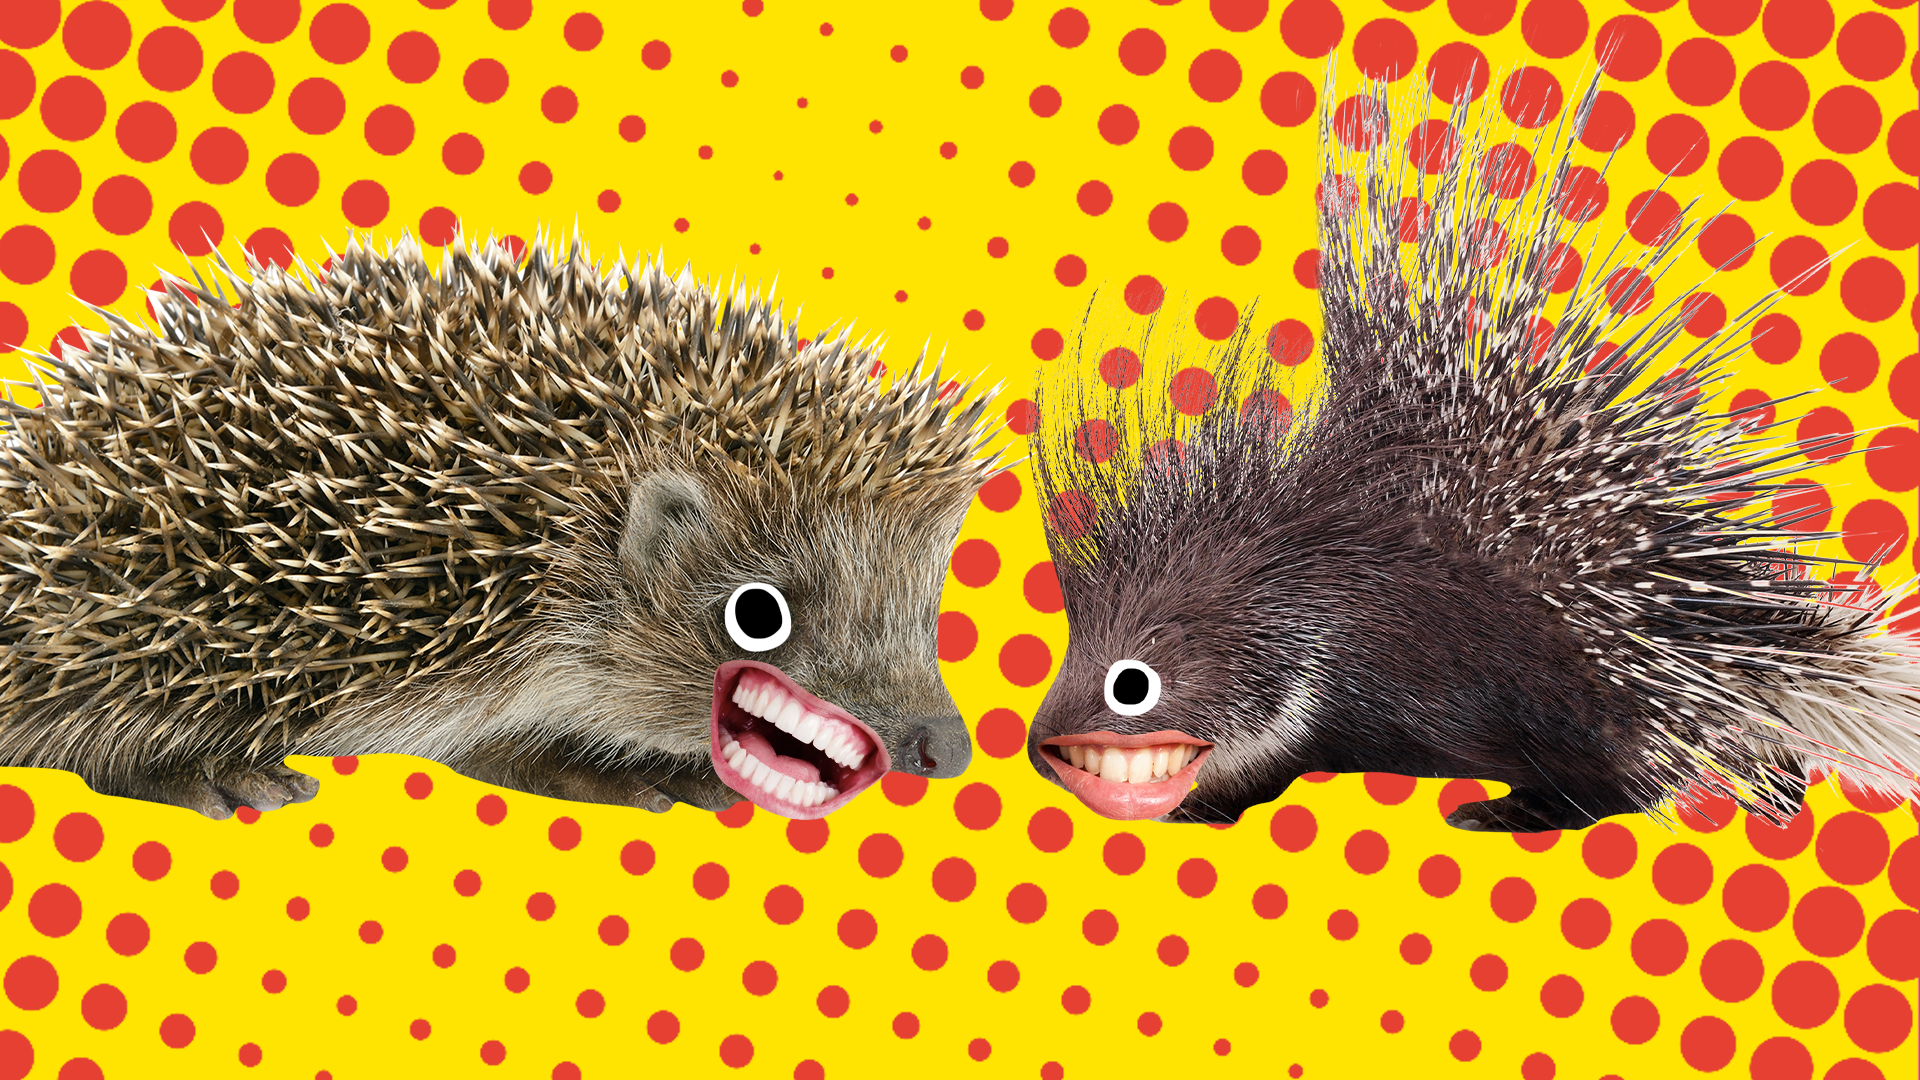 Two brown hedgehogs squaring up to each other